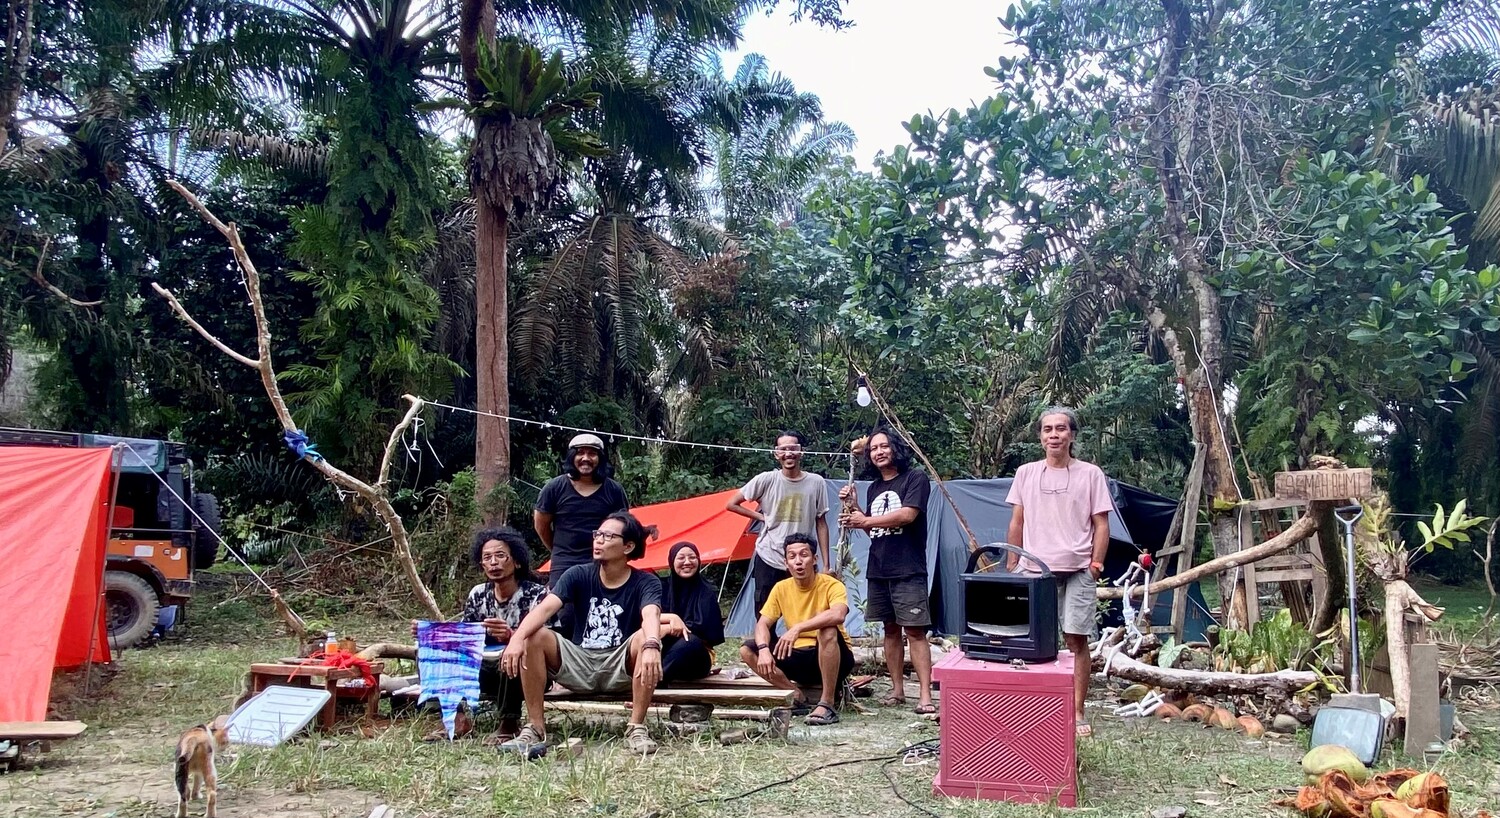 Rumah Budaya Sikukeluang and Artists in Residency of Semah Bumi Festival in their backyard studio: a collective of artists from Pekanbaru-Sumatra who worked with researchers from Göttingen University and the university in Jambi and led the artistic conception for the semah bumi festival (balancing, serving, seeding) with the perspective of sustainability in the region